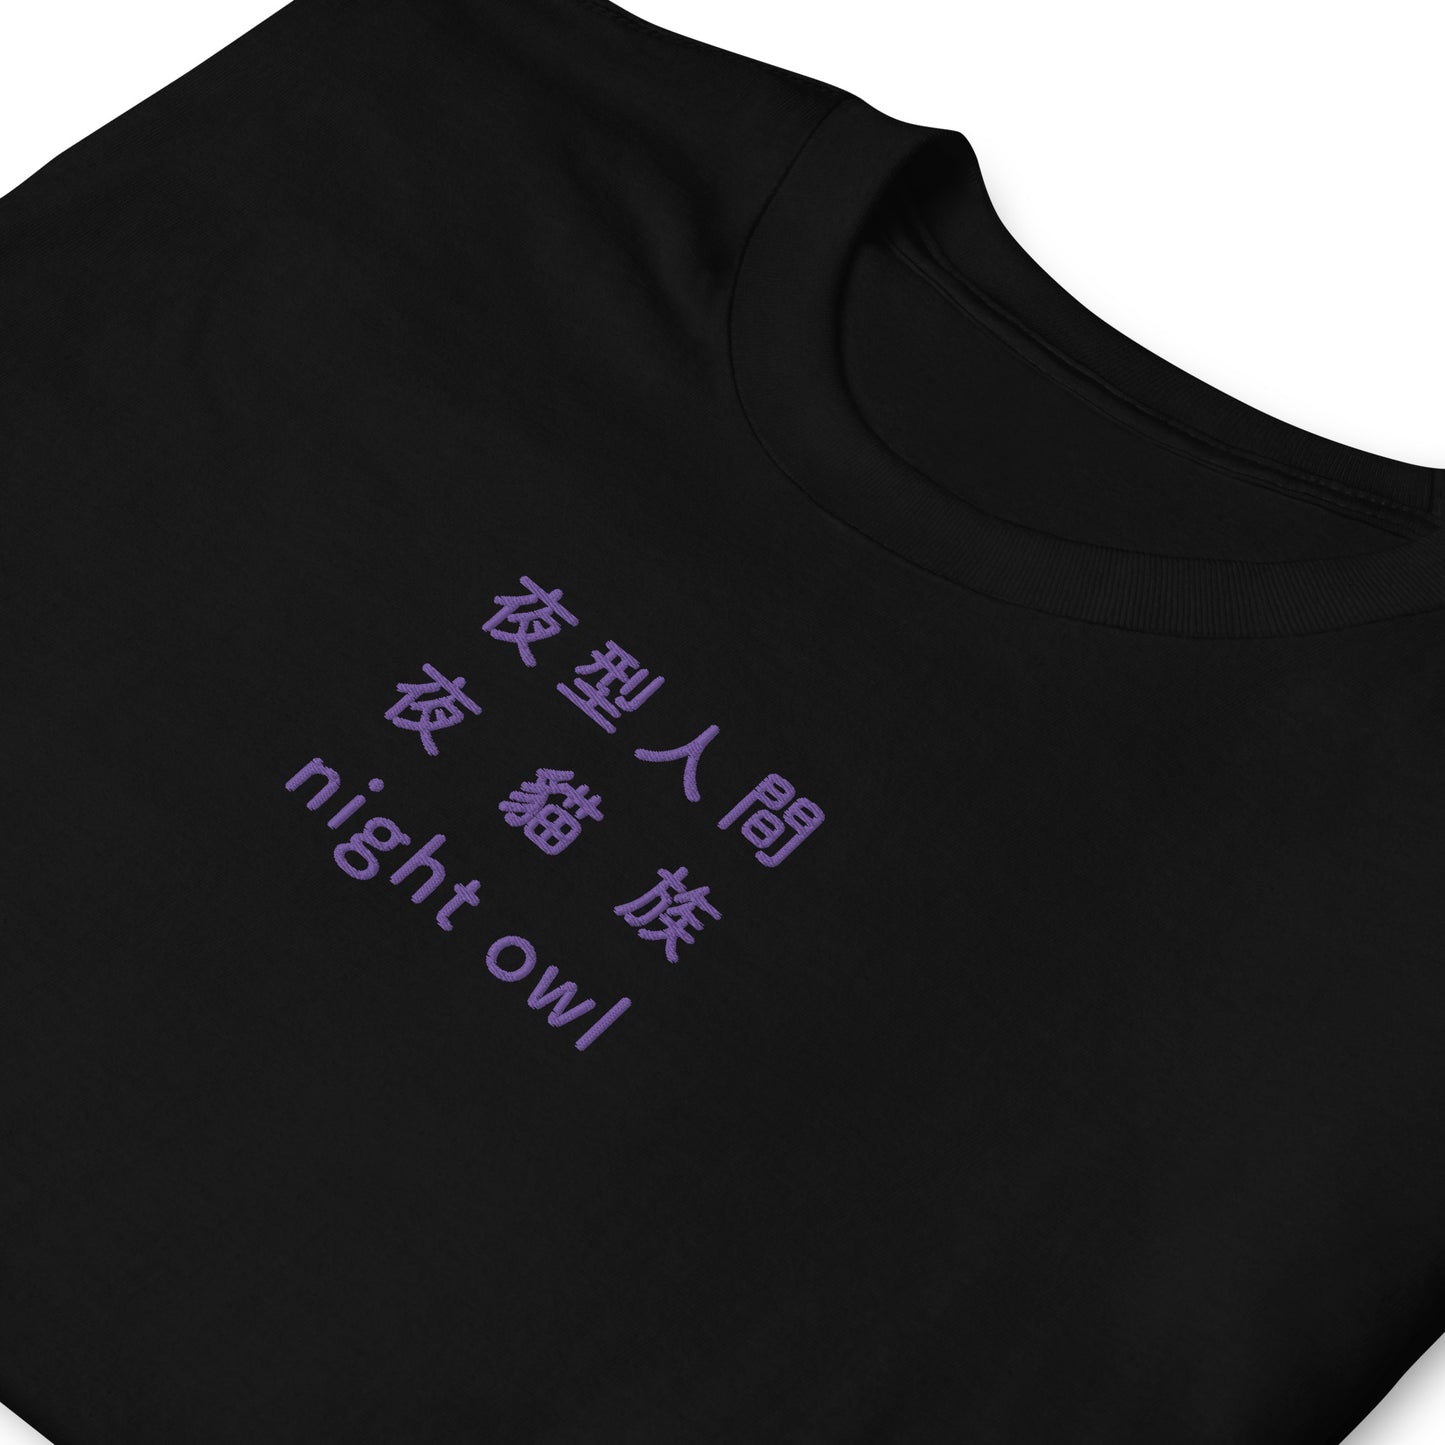 Black High Quality Tee - Front Design with an Purple Embroidery "Night Owl" in Japanese,Chinese and English